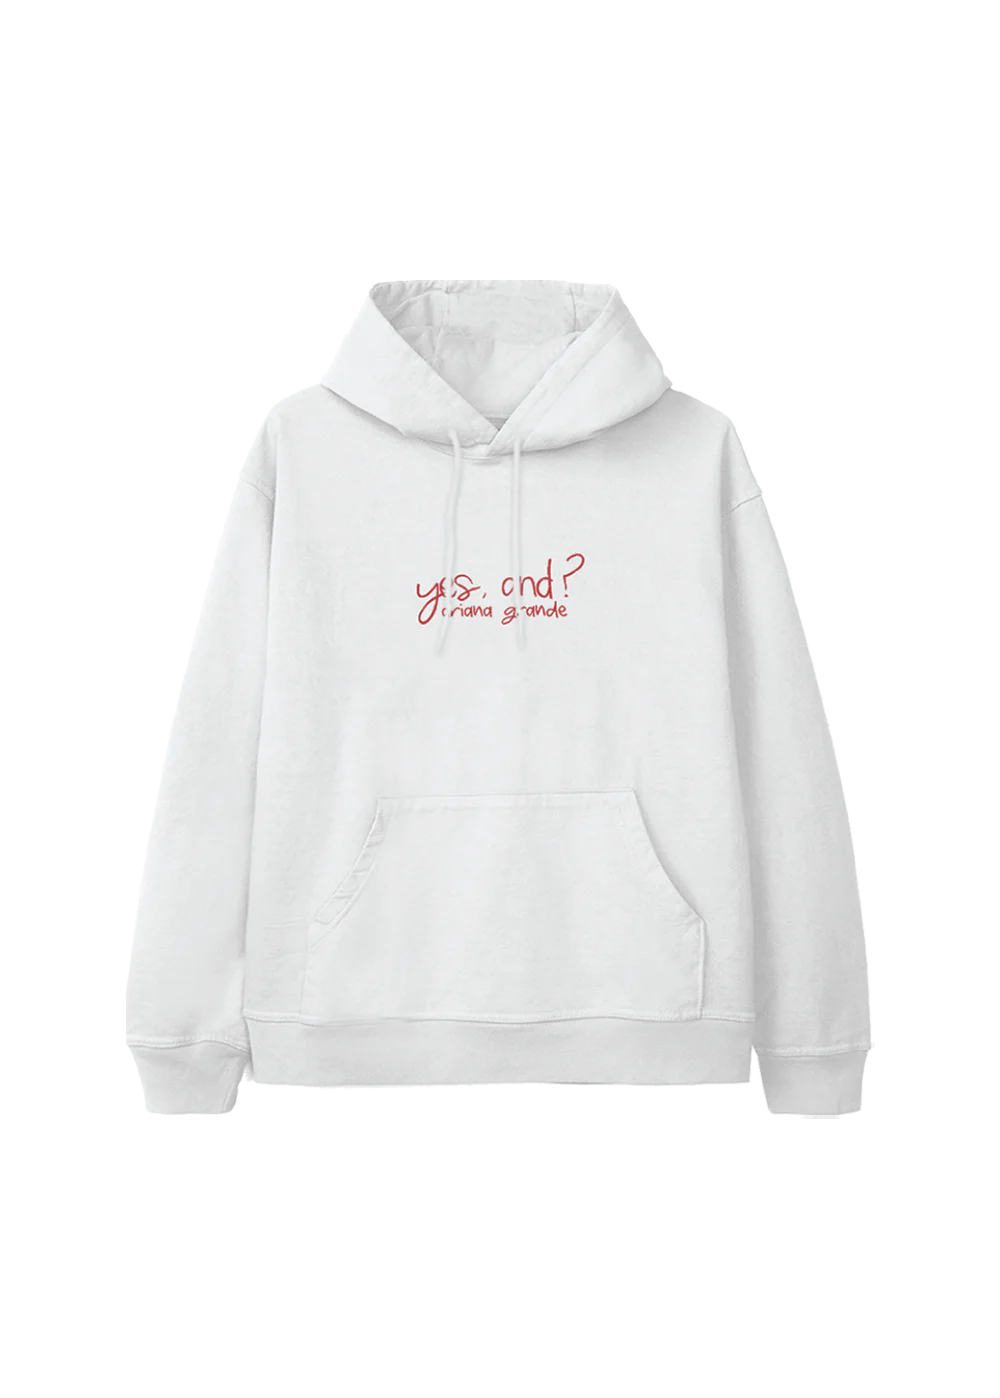 Ariana Grande - yes, and? collage hoodie